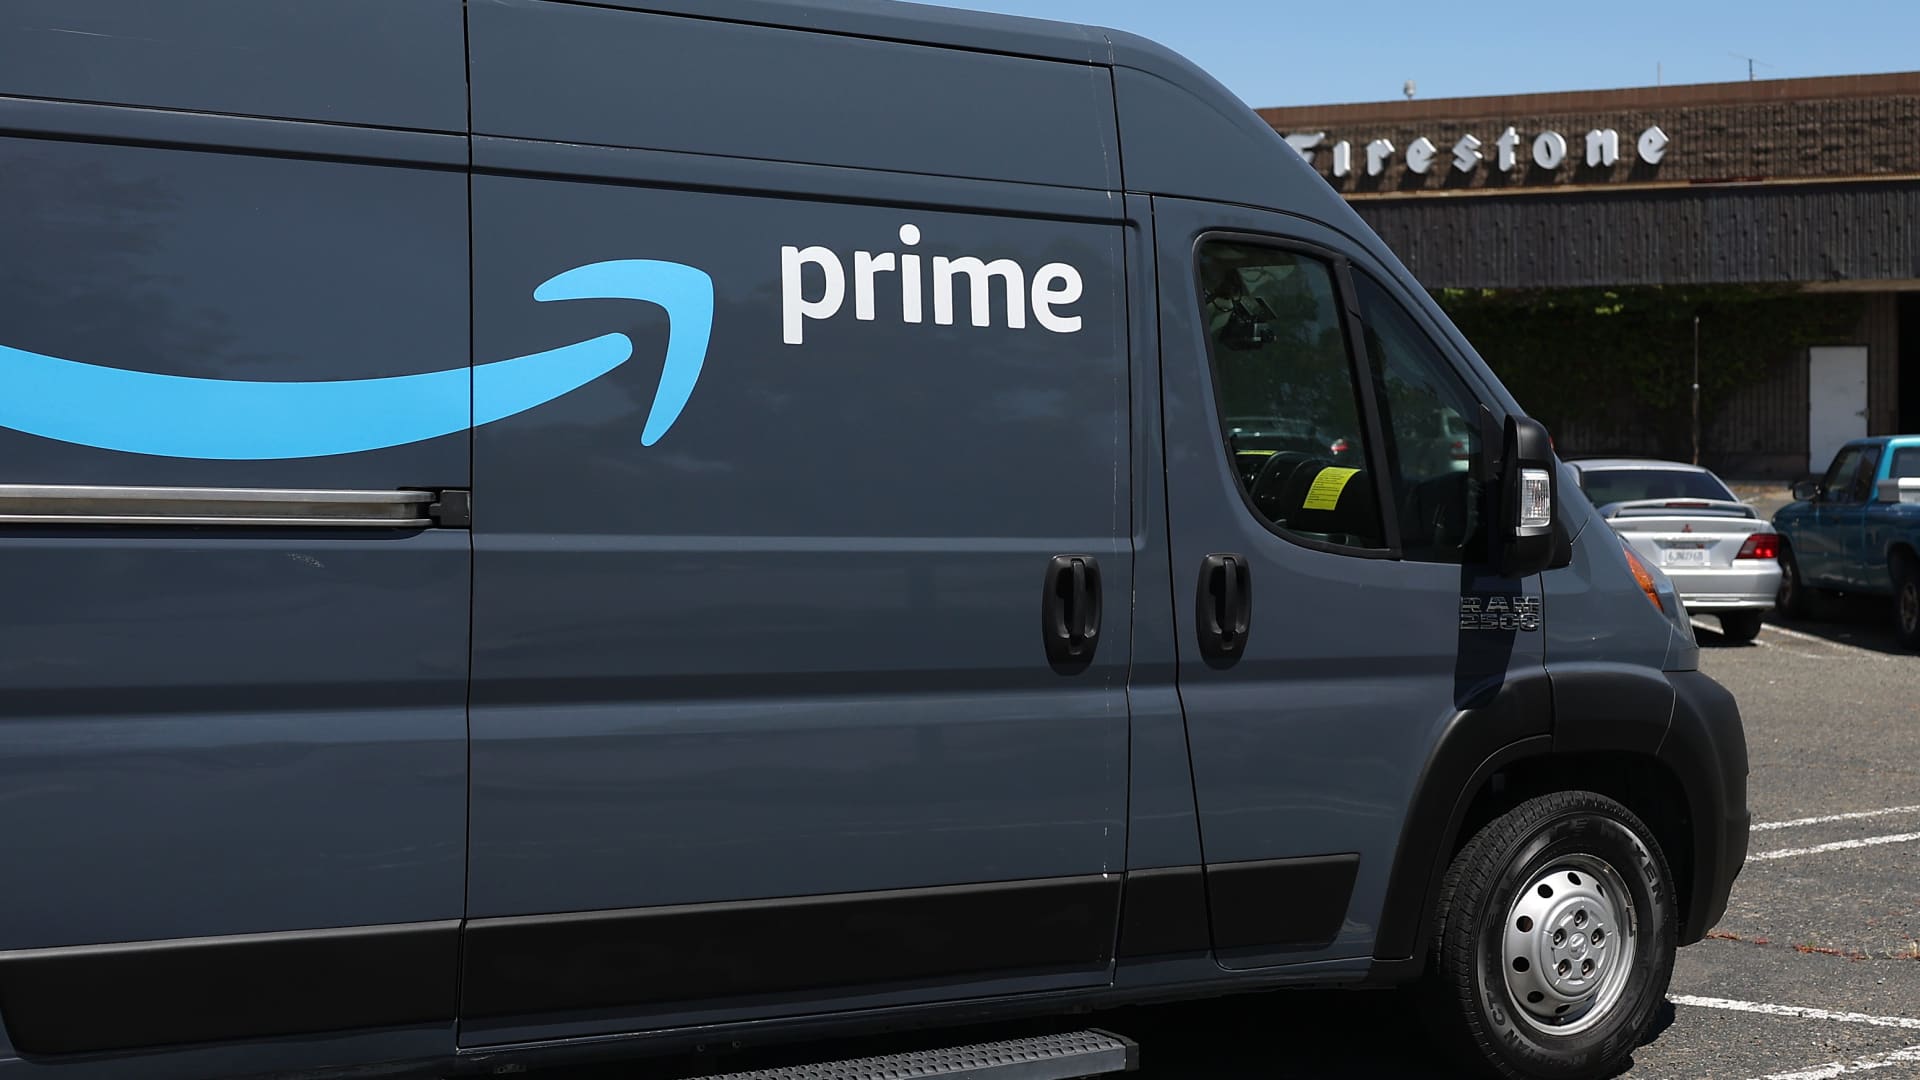 Amazon raises free shipping minimum to $35 for some customers who don’t have Prime